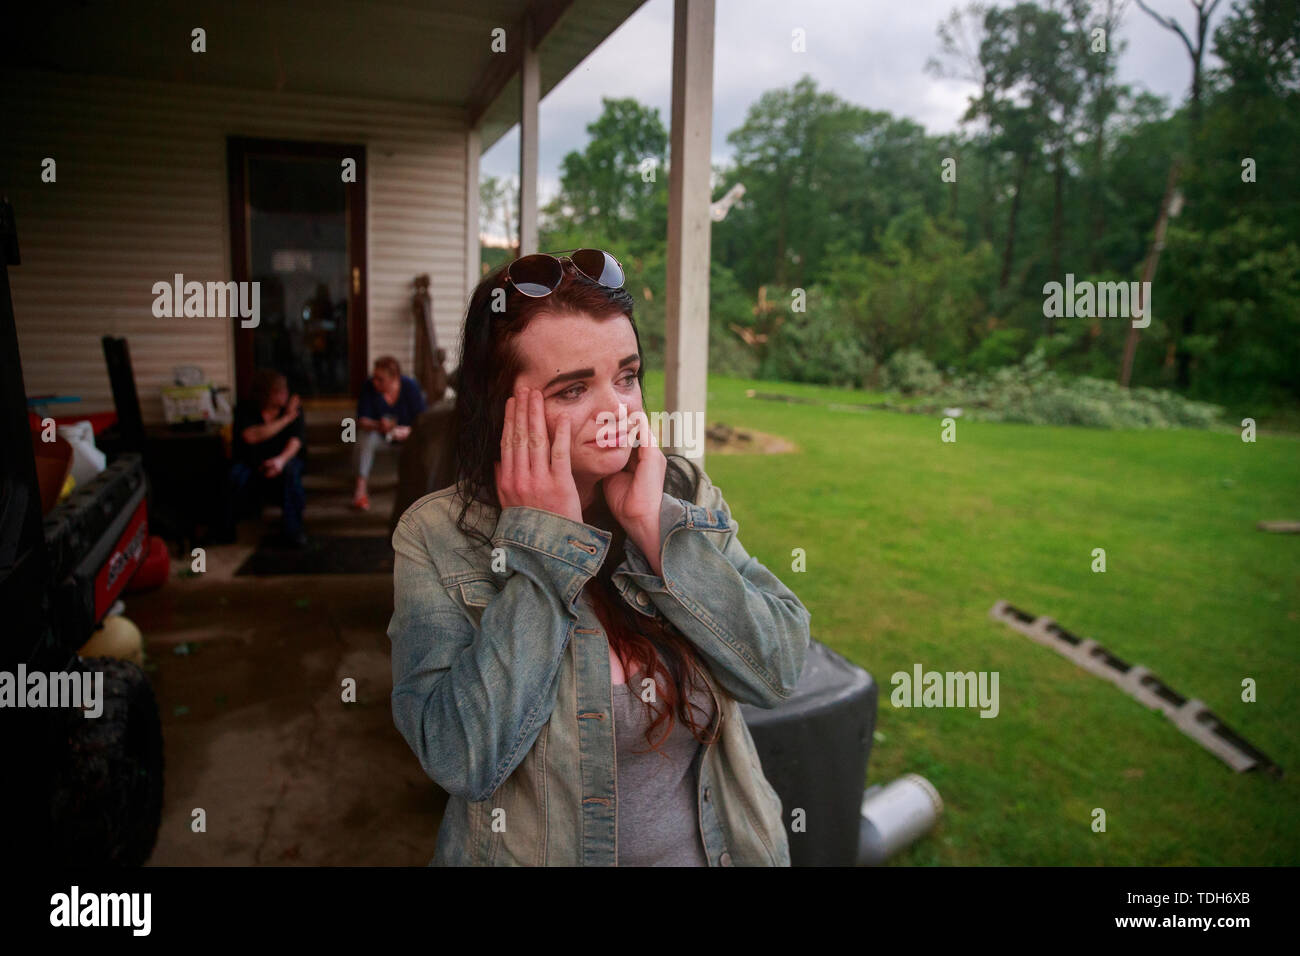 Ellettsville, USA. 15th June, 2019. Nicole Rood reacts after telling how she survived a tornado by holding onto the door handle of a house as she was lifted off the ground in the 6400 block of West Cowden Rd. near Ellettsville. Rood's boyfriend Brett Cantrell survived by hanging onto a tree across the road. The couple were in their car when the storm stuck. The tornado destroyed several homes, tore up trees, and left dangerous live power lines scattered around the area. Credit: SOPA Images Limited/Alamy Live News Stock Photo